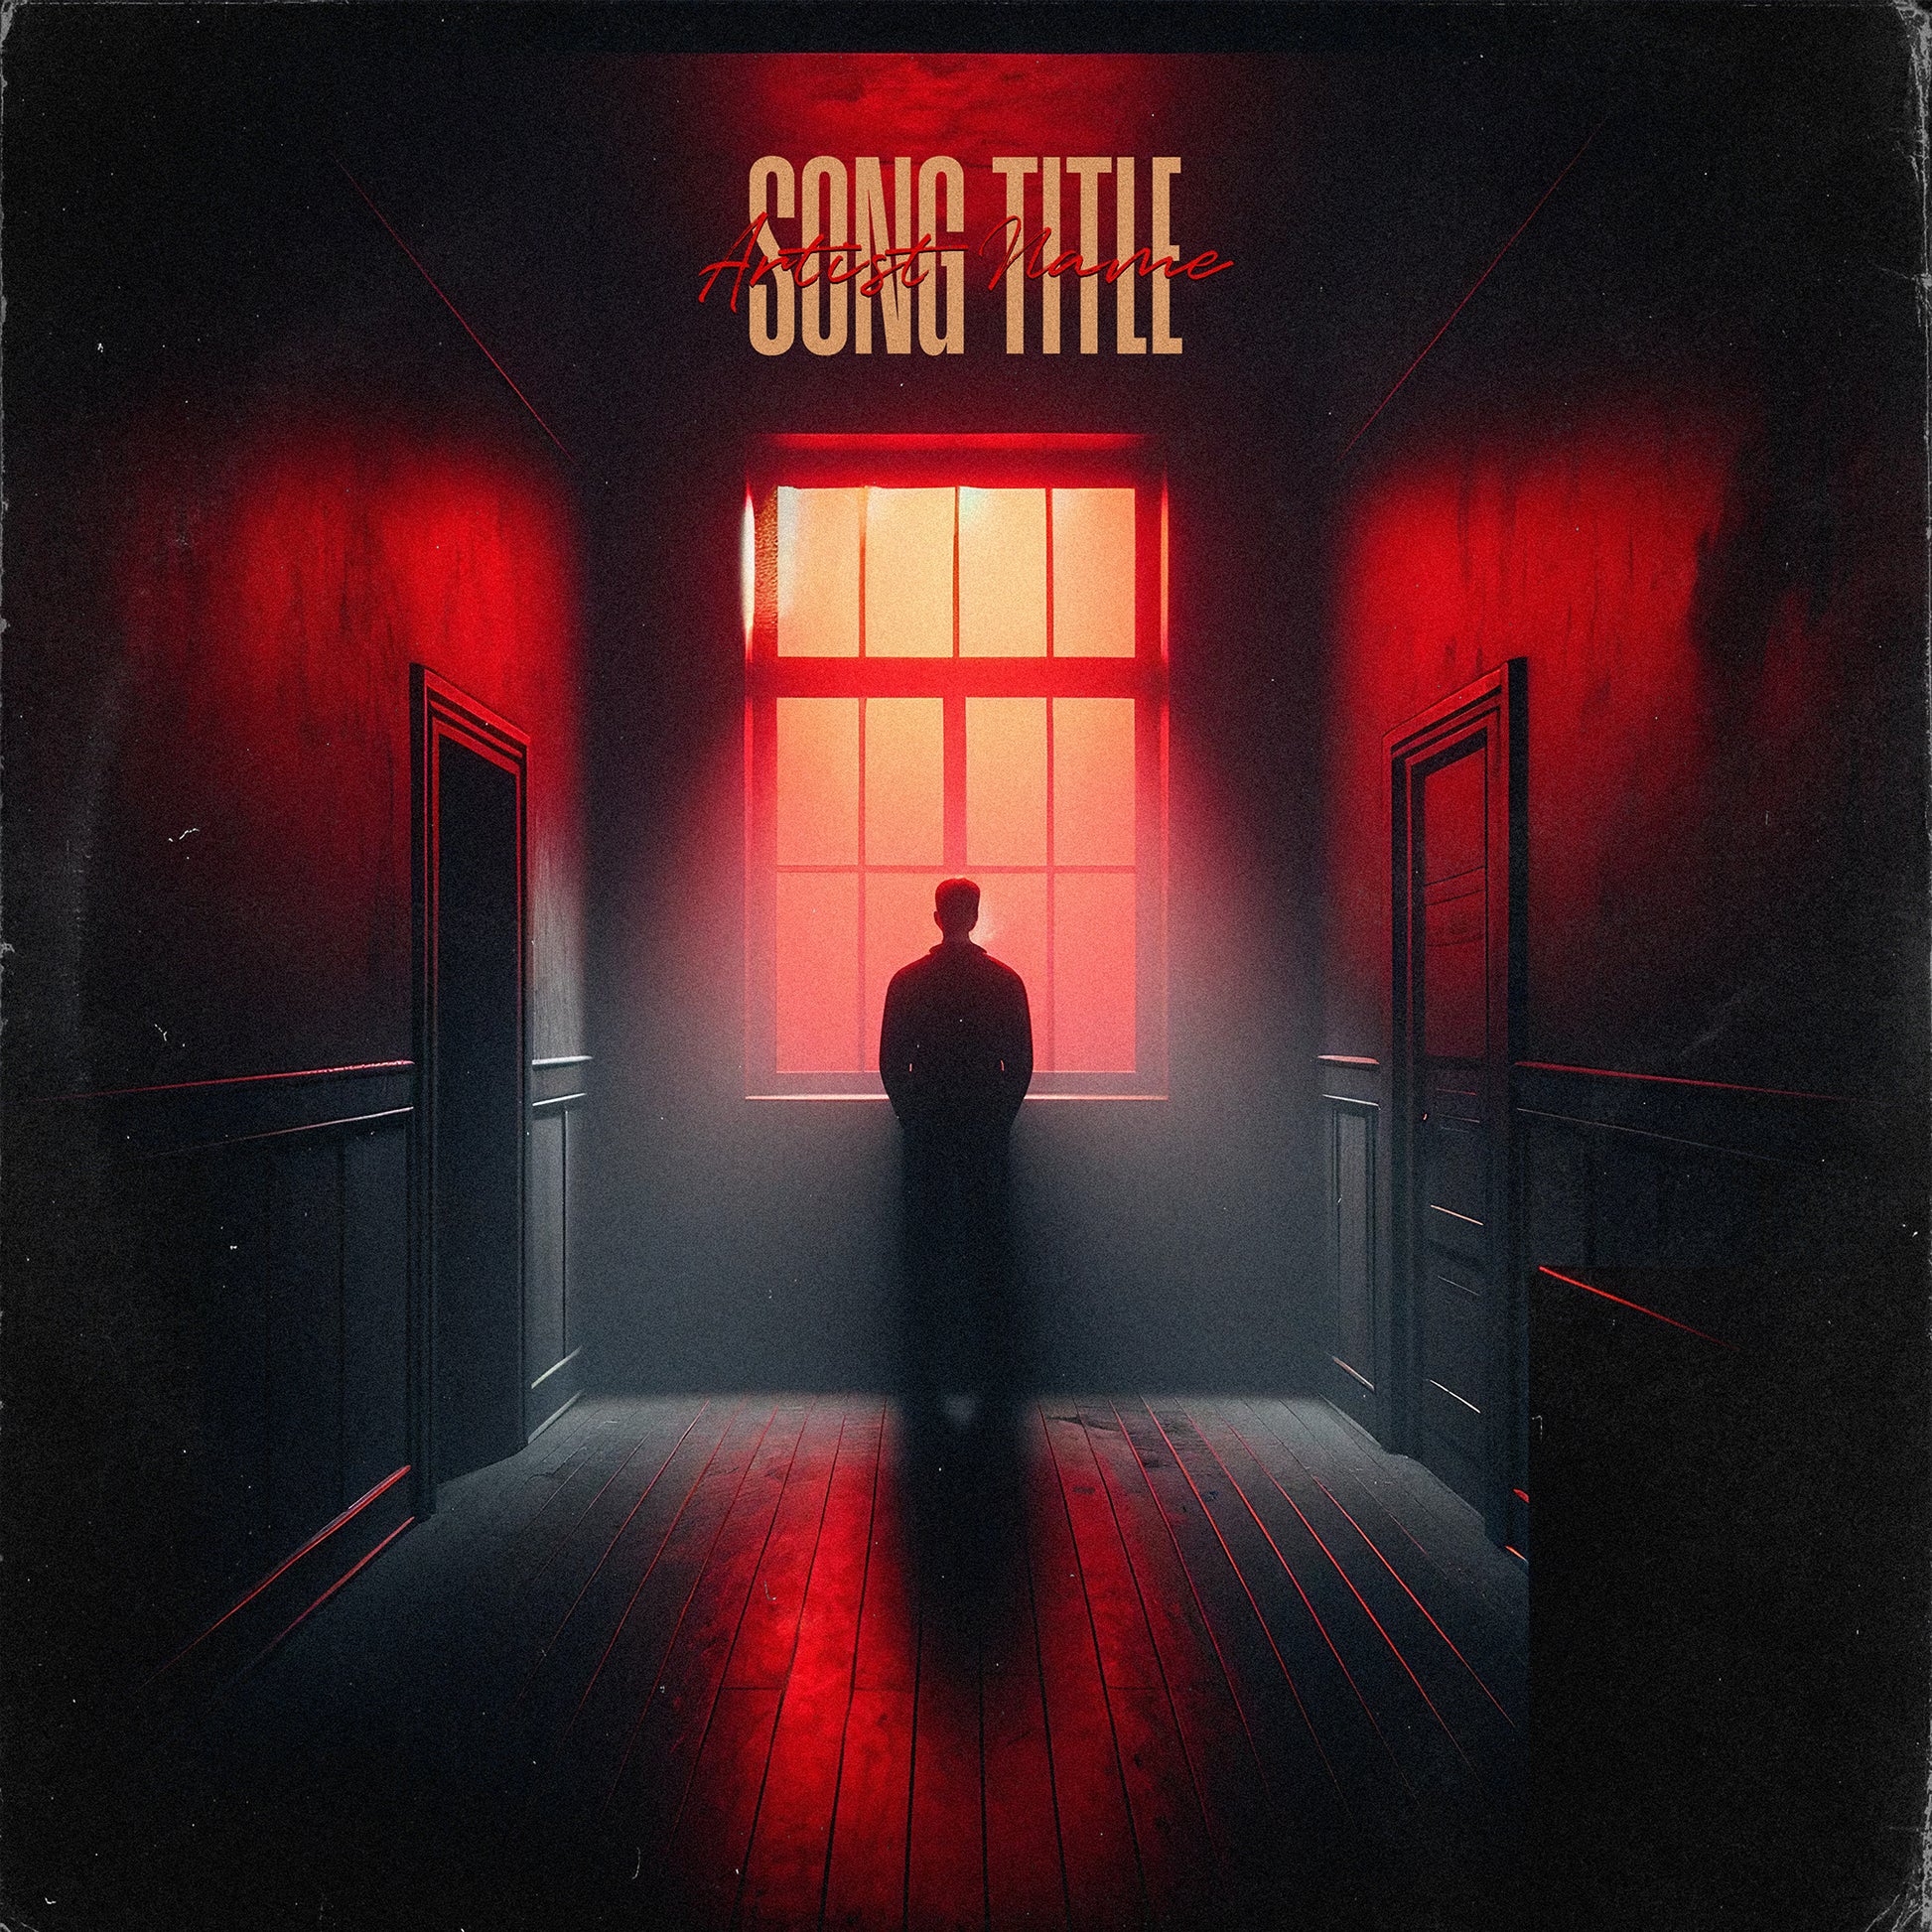 Silhouette in red room spooky music cover art